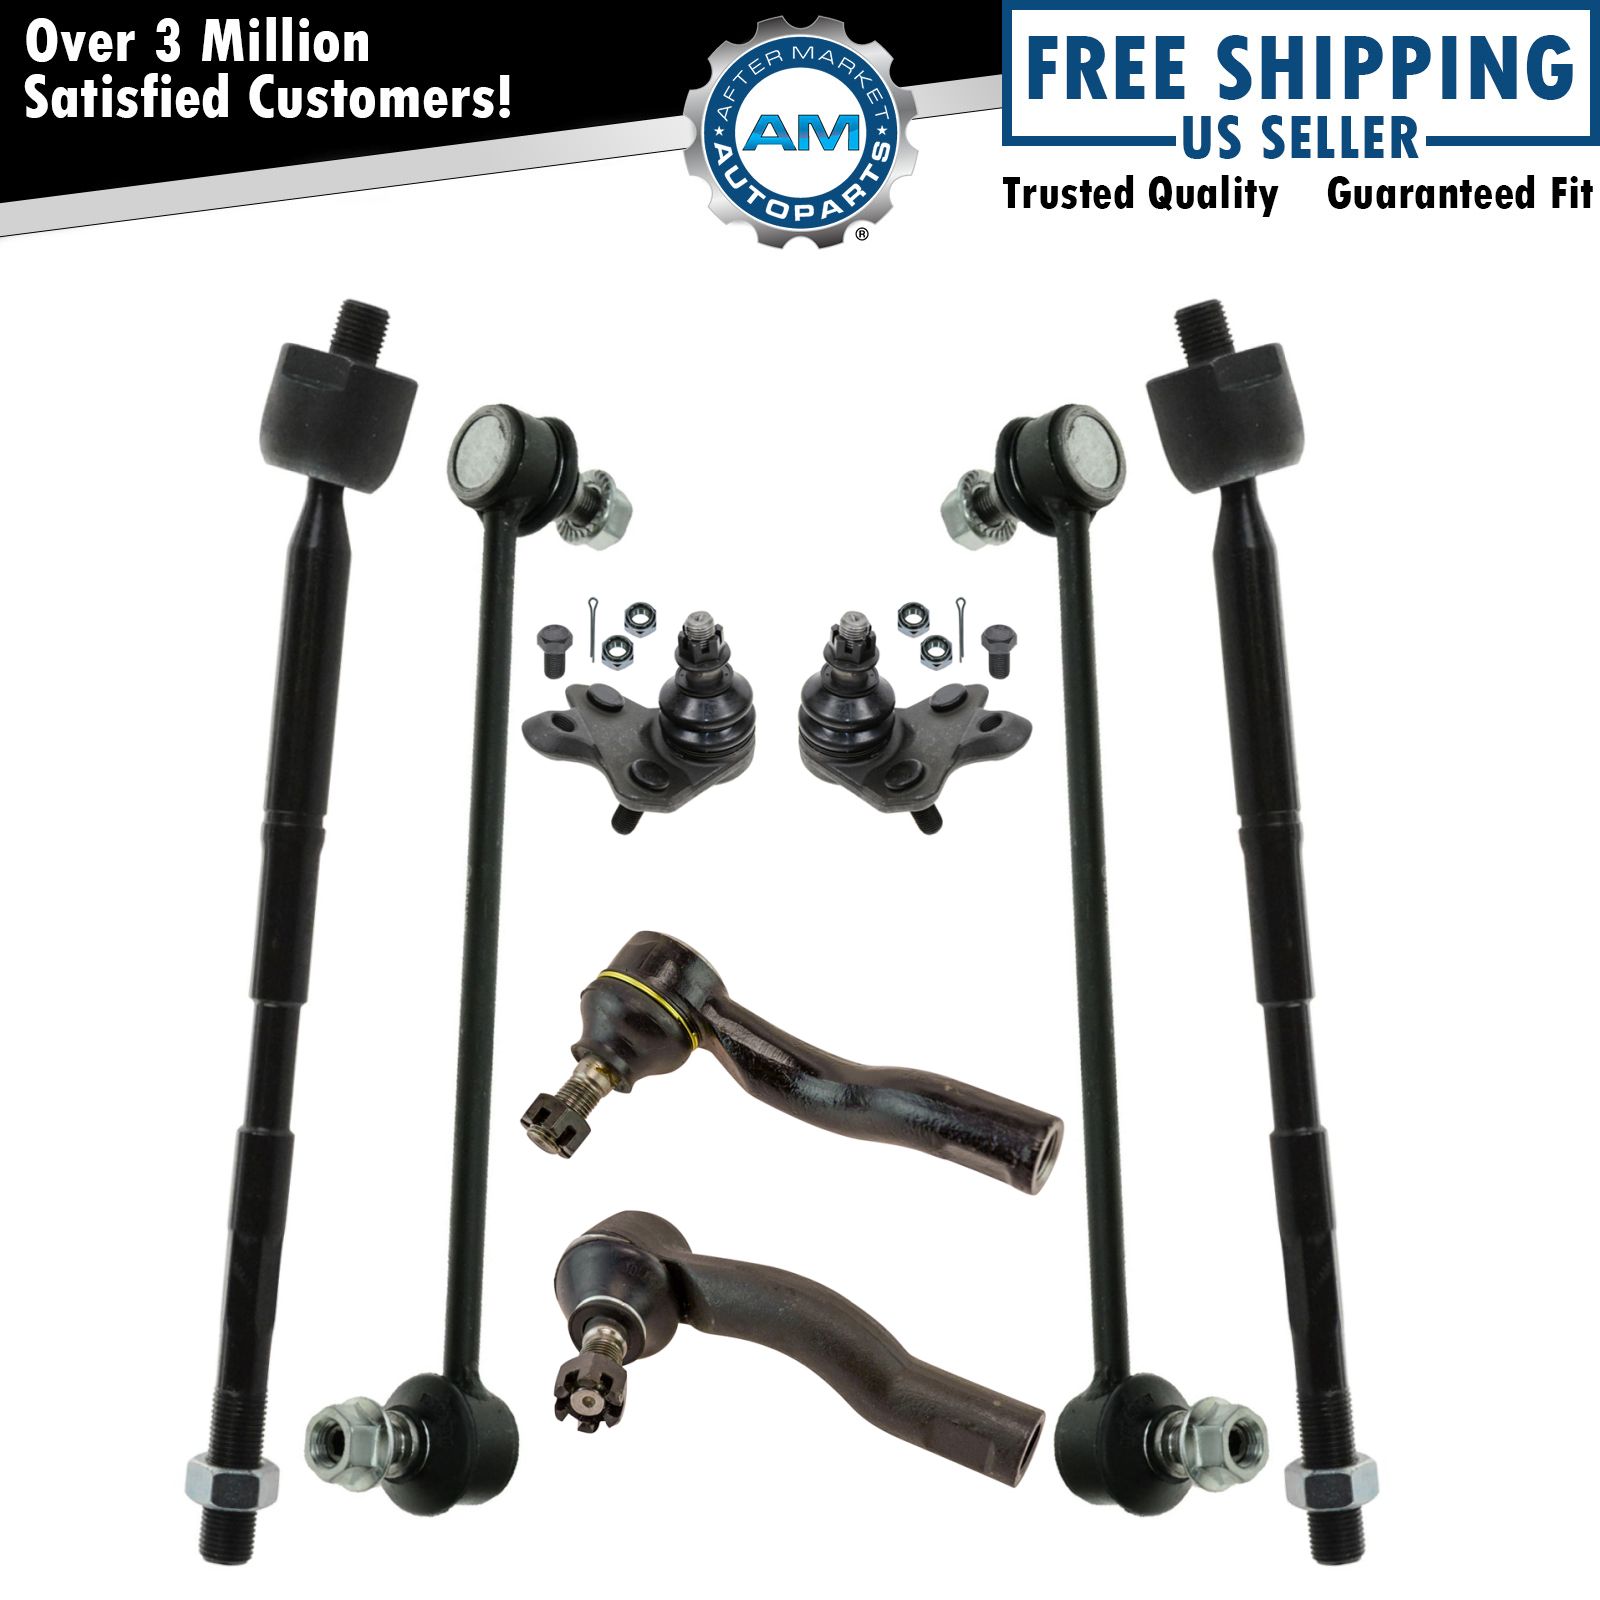 8pc Steering Suspension Kit Ball Joints Tie Rods Sway Bar Links for Scion TC